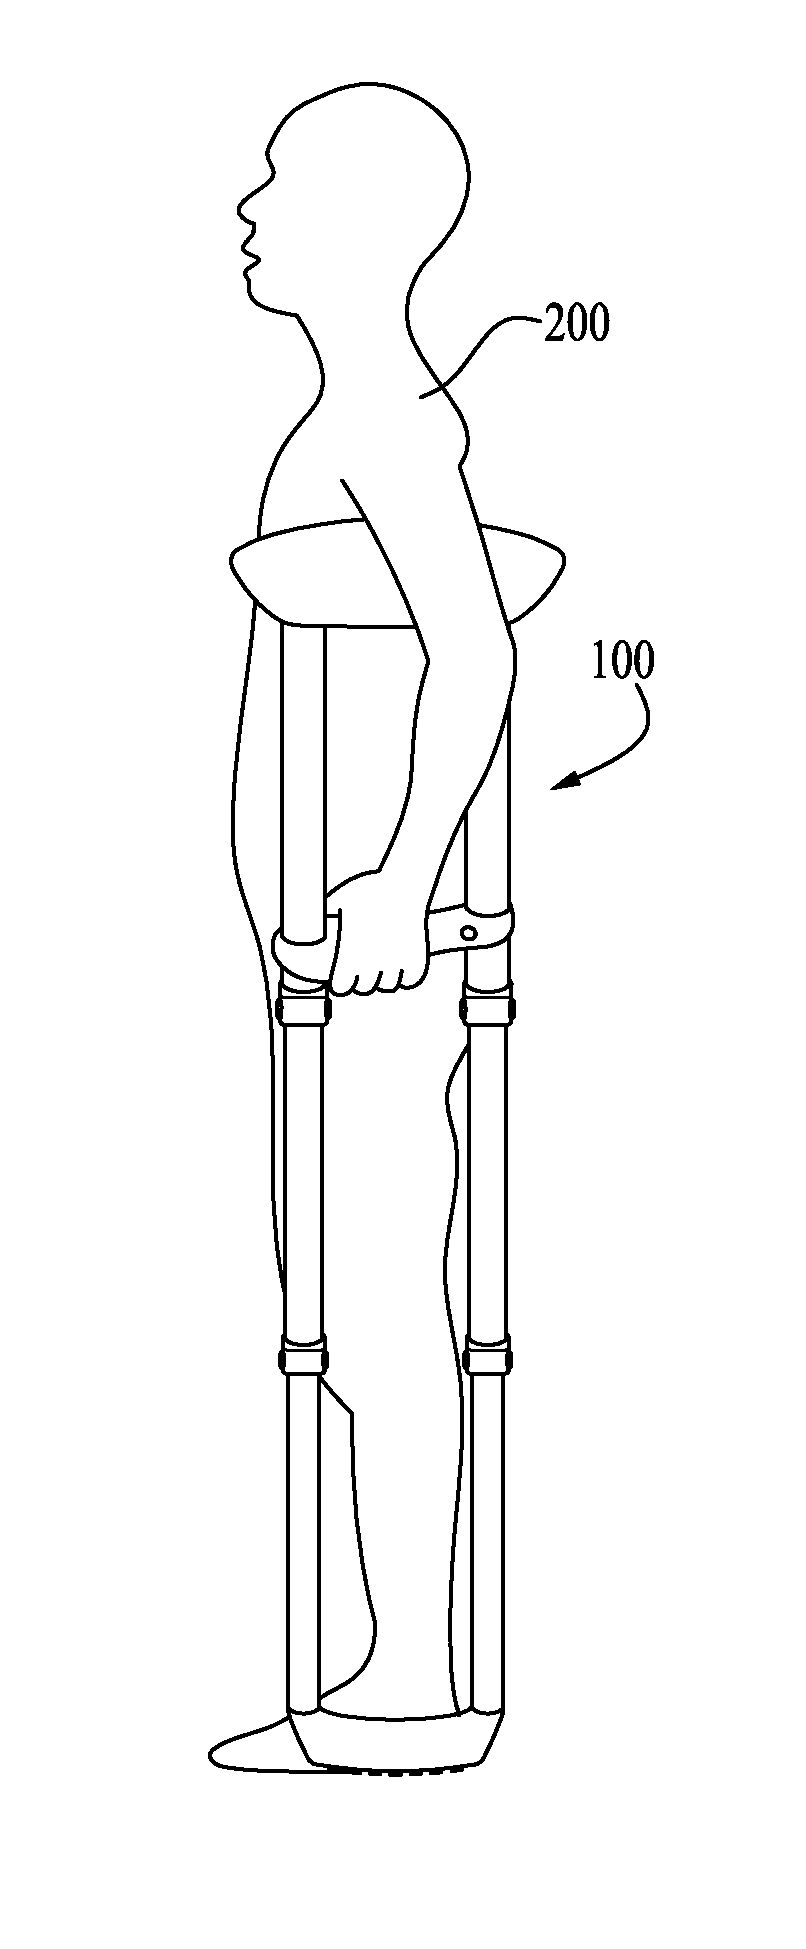 Crutches and Sitting Device